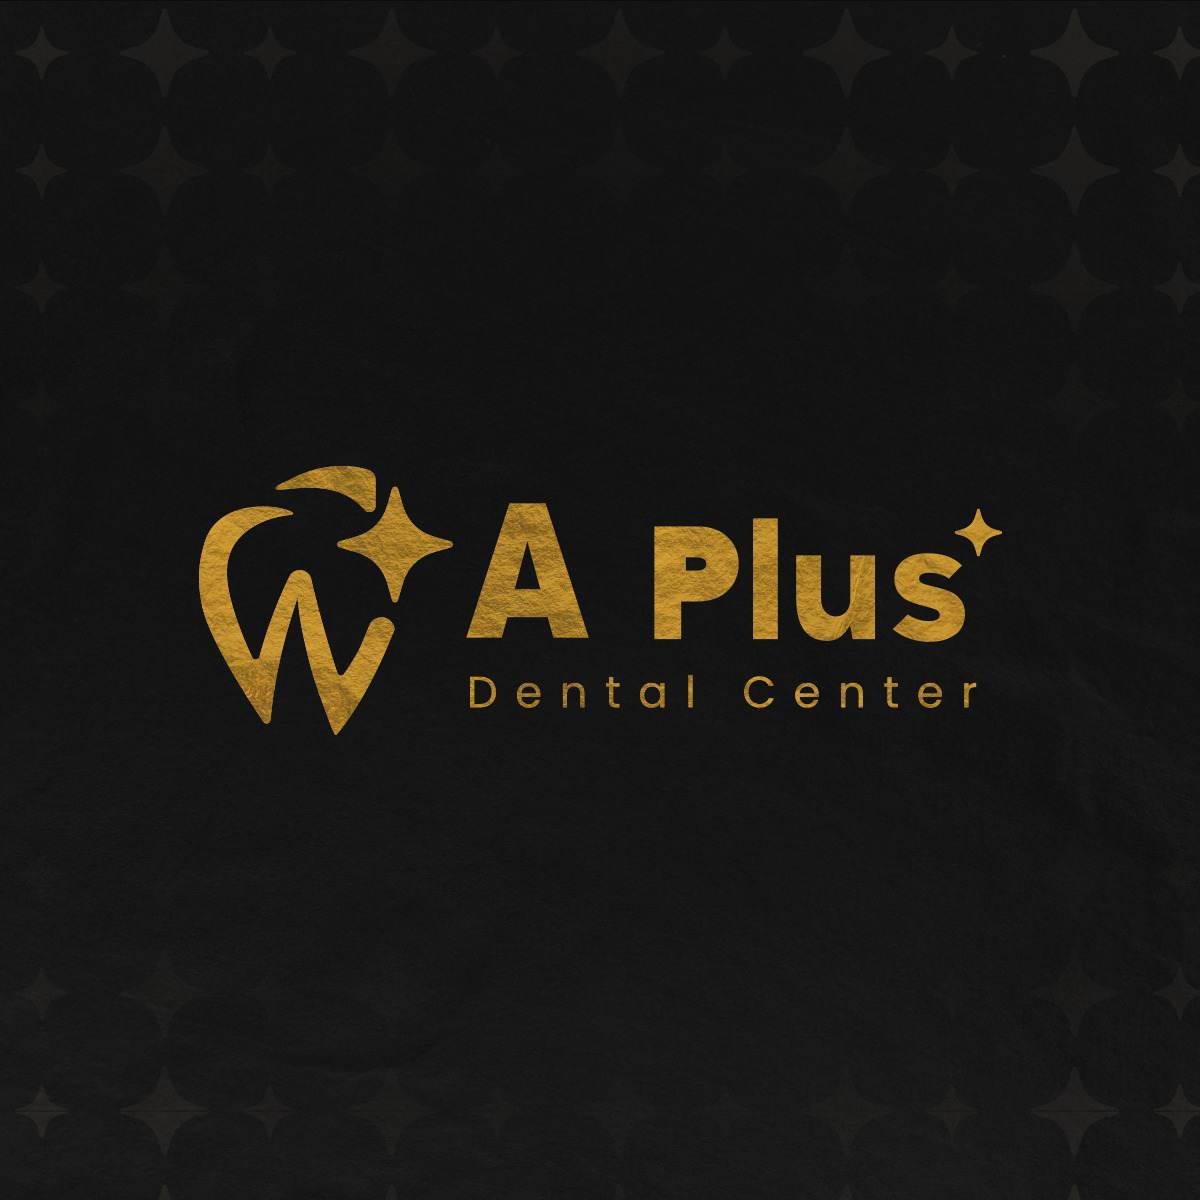 A plus dental clinic logo including the word A plus dental center in a golden color besides a molar and a black background